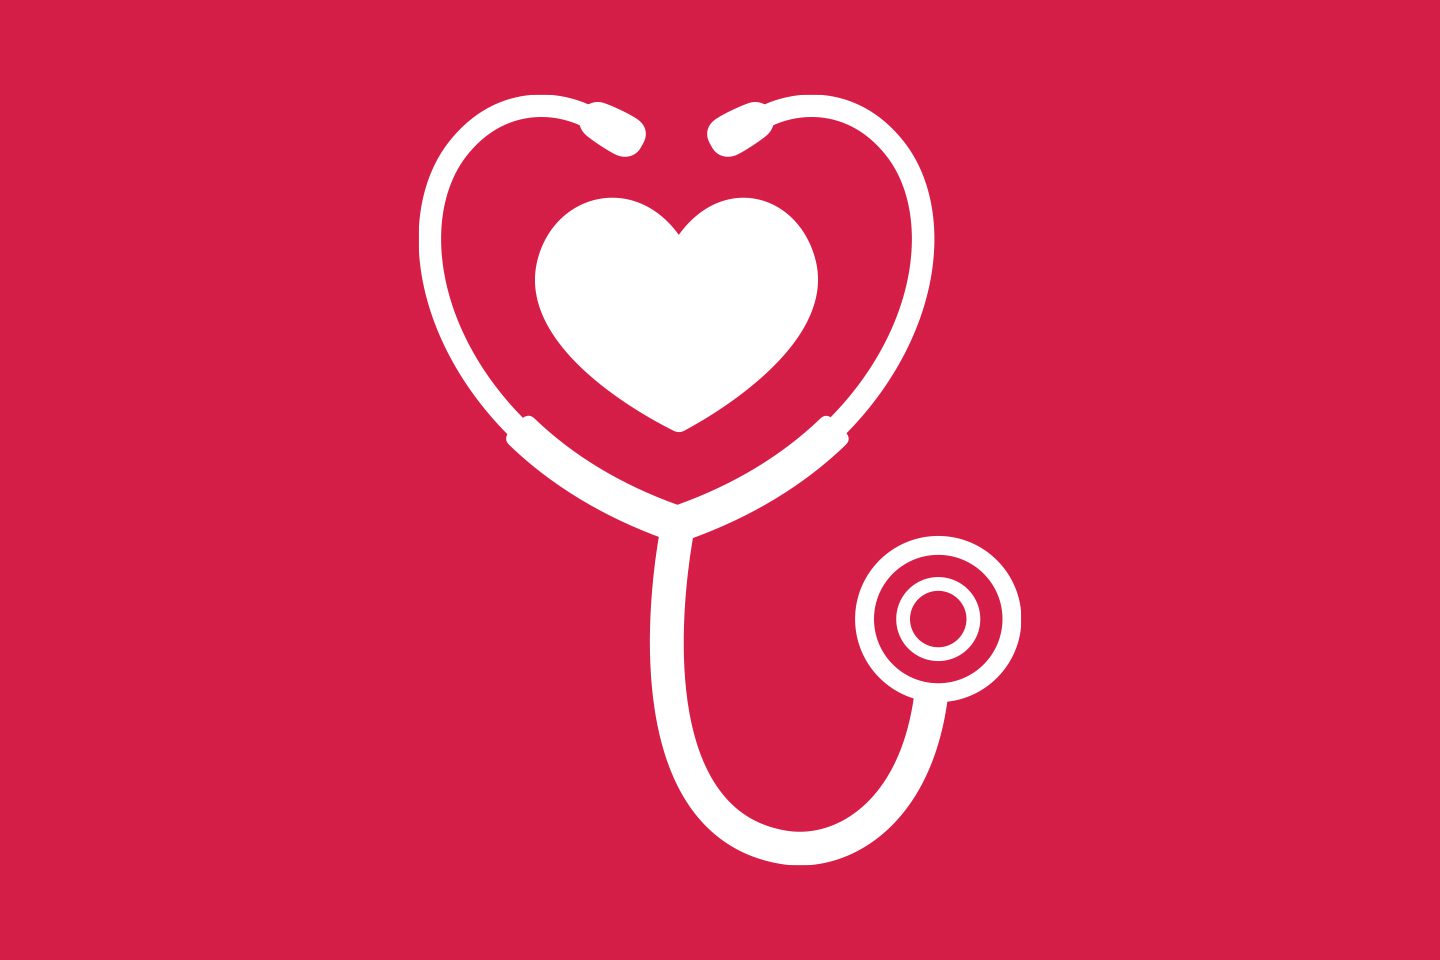 stethoscope and heart reversed out of red background